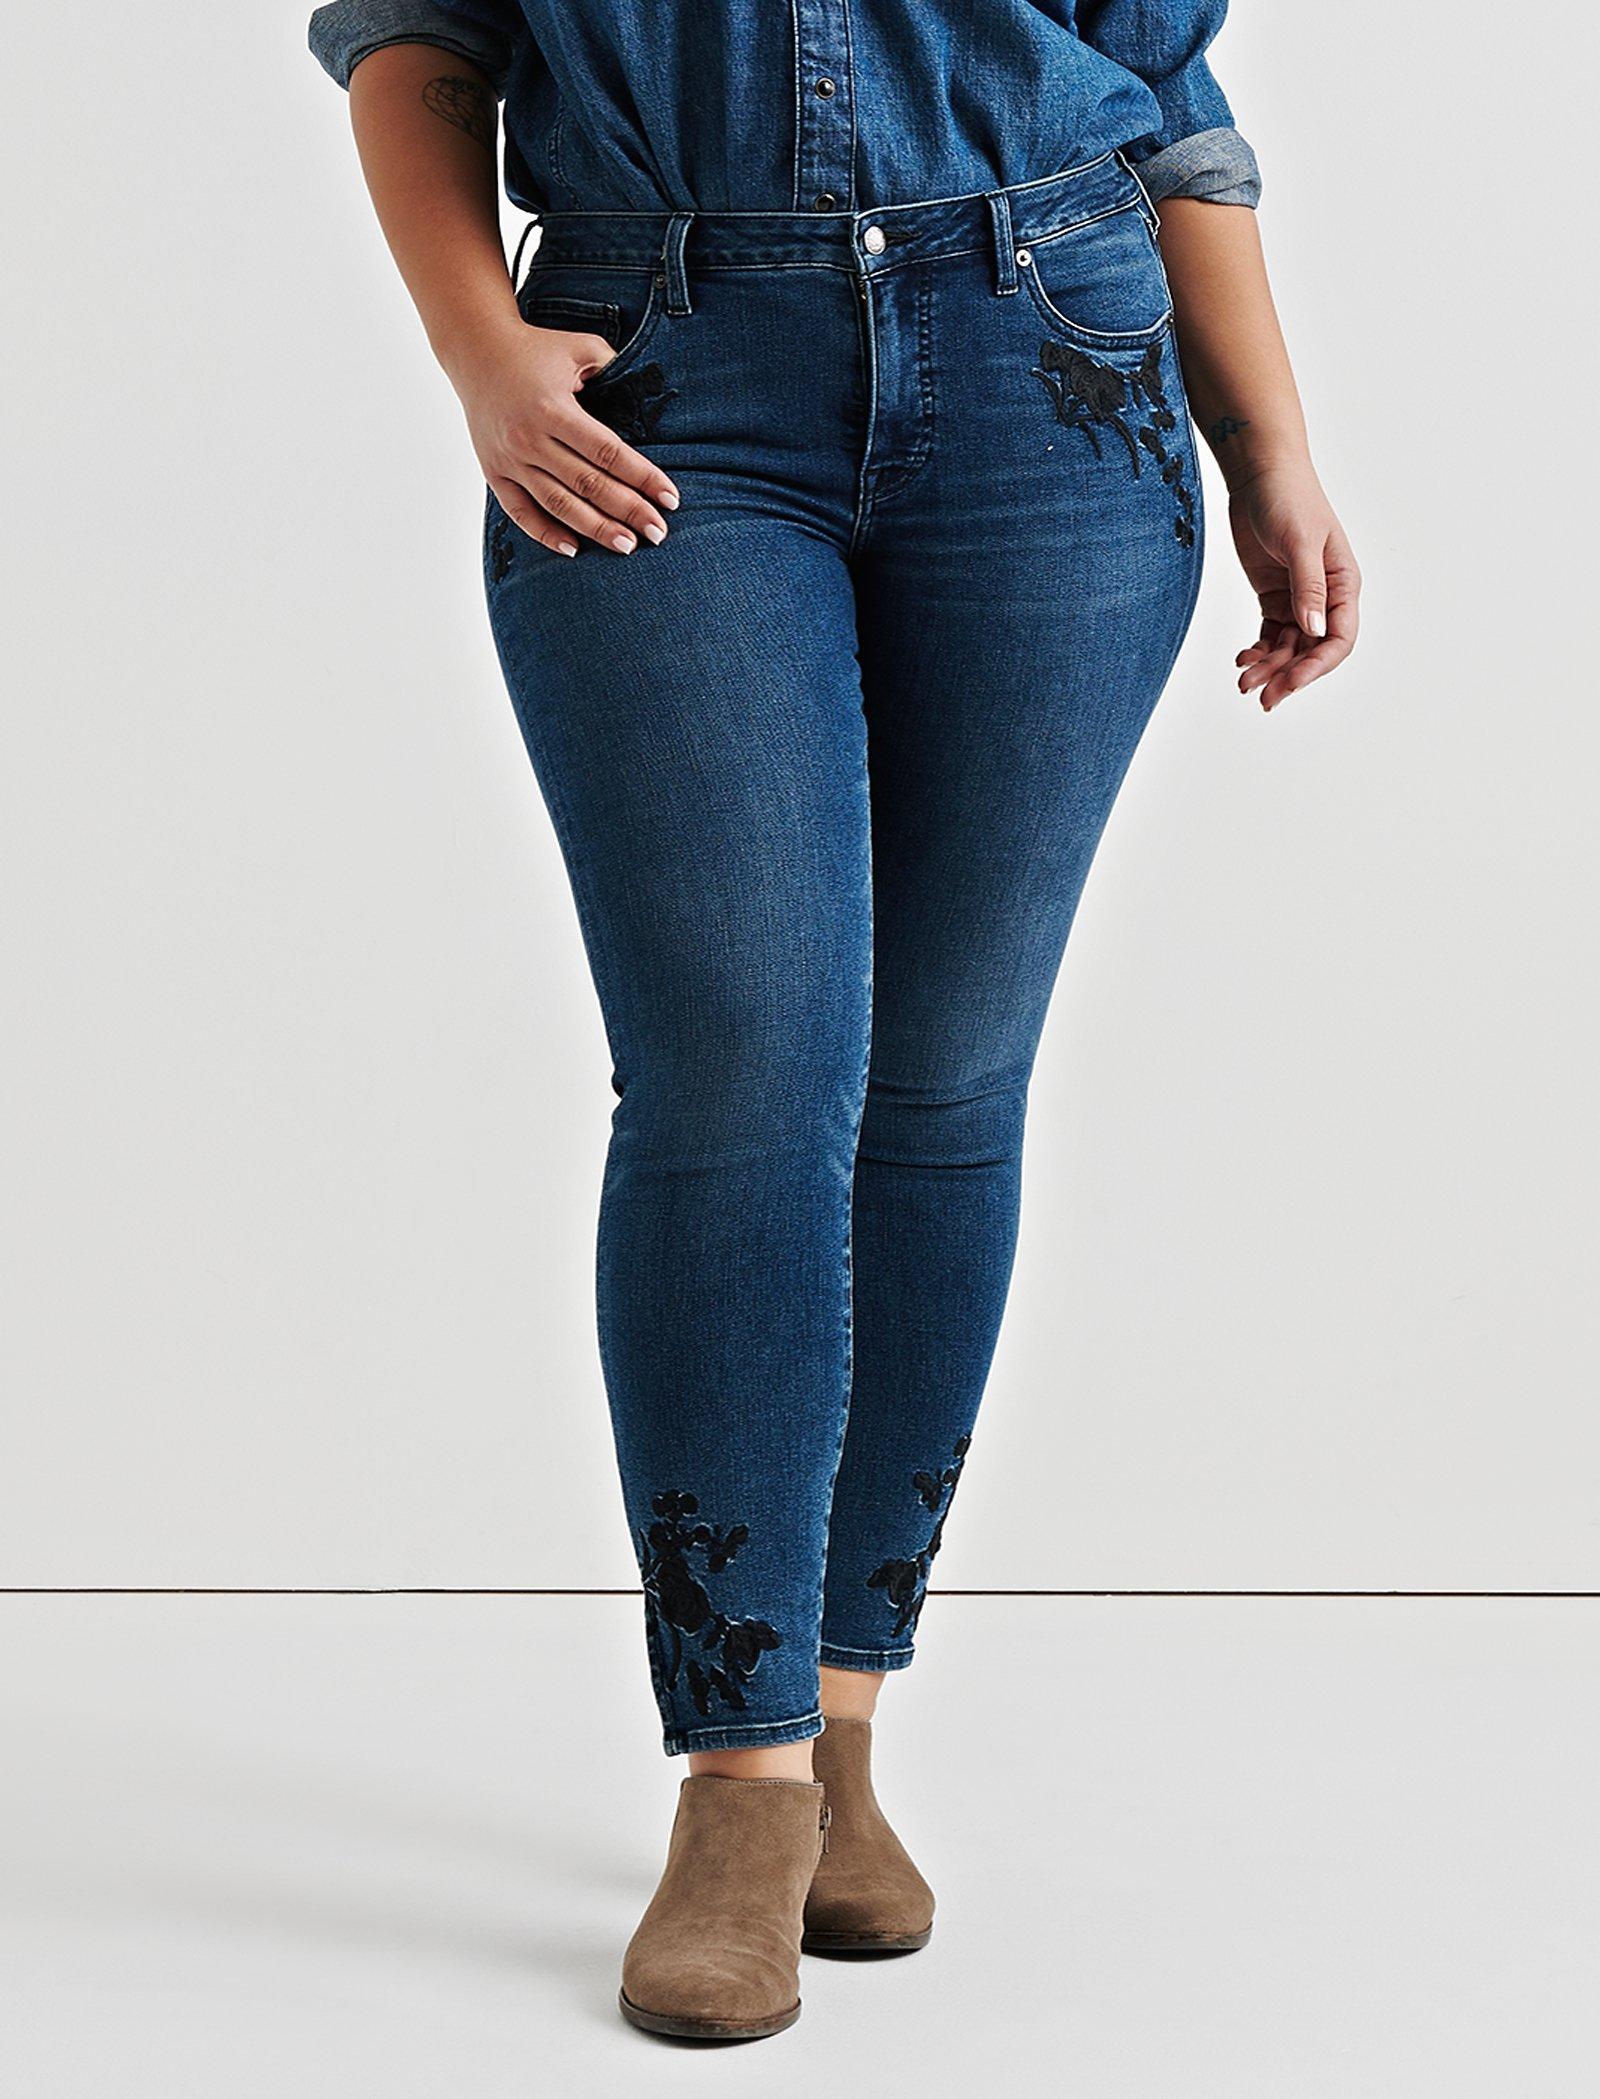 plus size lucky jeans